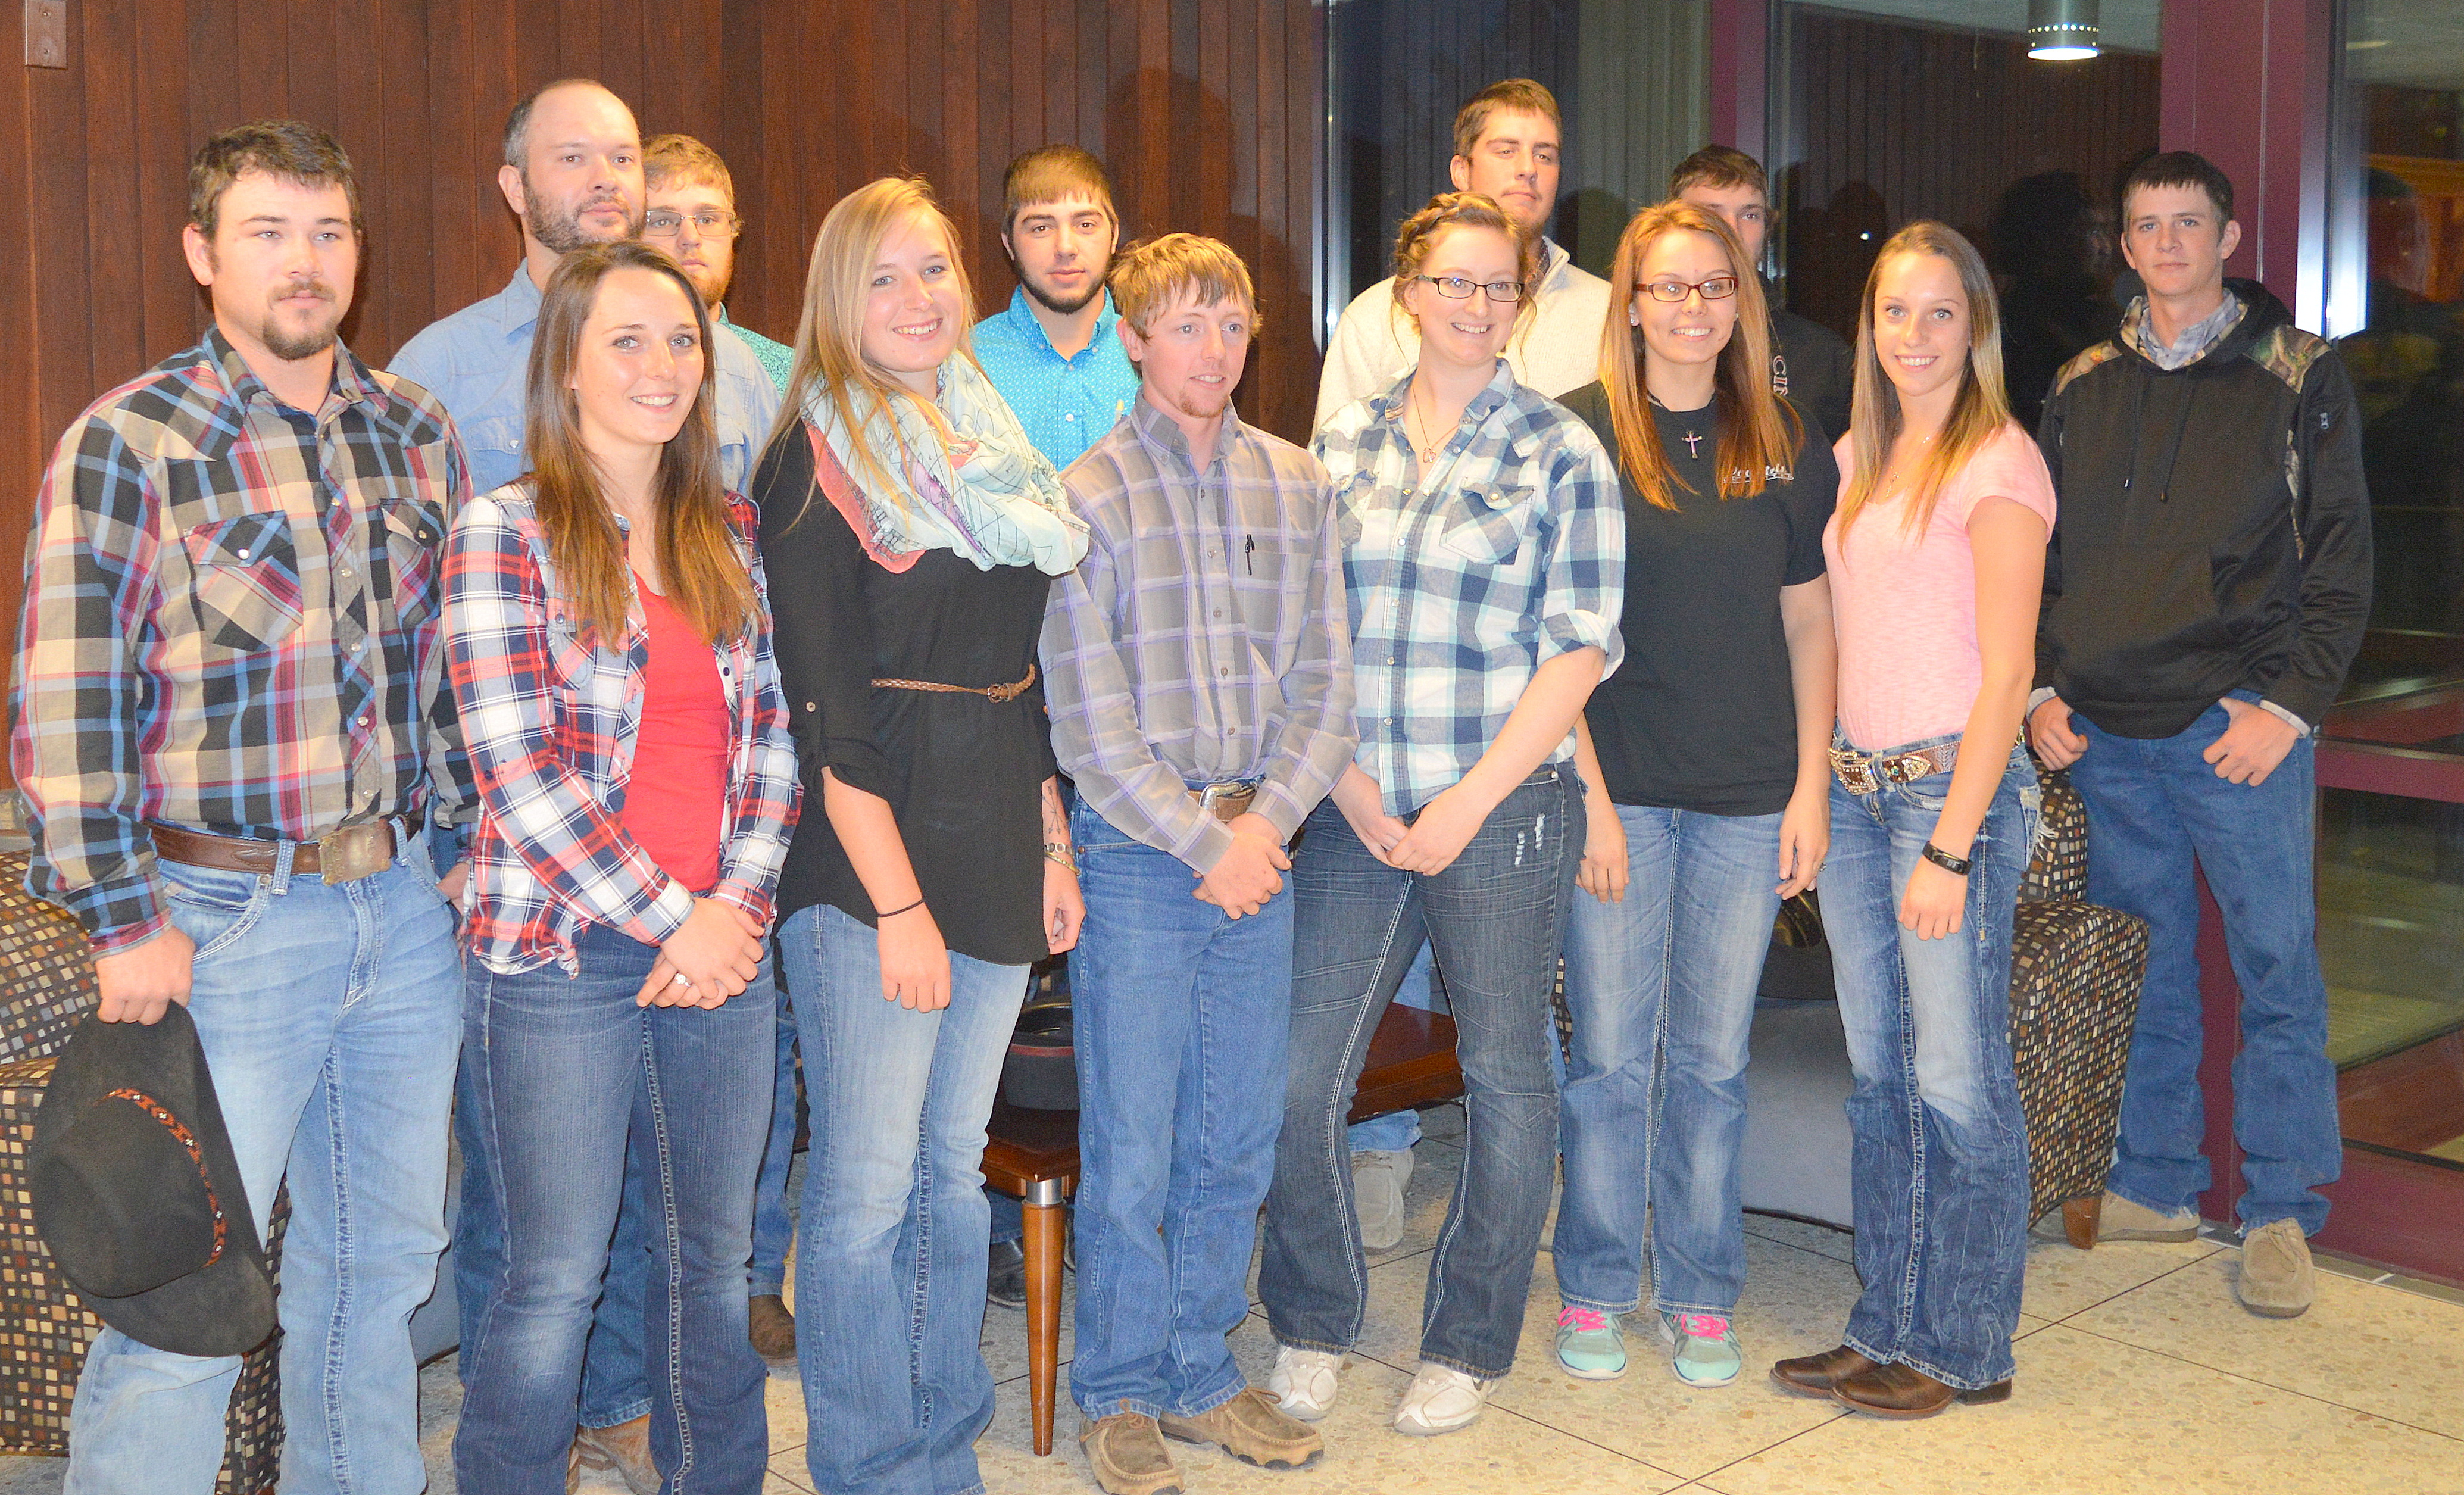 NCTA students representing range management and livestock industry management courses recently attended agriculture forums at UNL. The public is invited to join students for a grasslands program with grazing consultant Allen Williams on Nov. 14 at the NCTA Education Center. (NCTA photo)